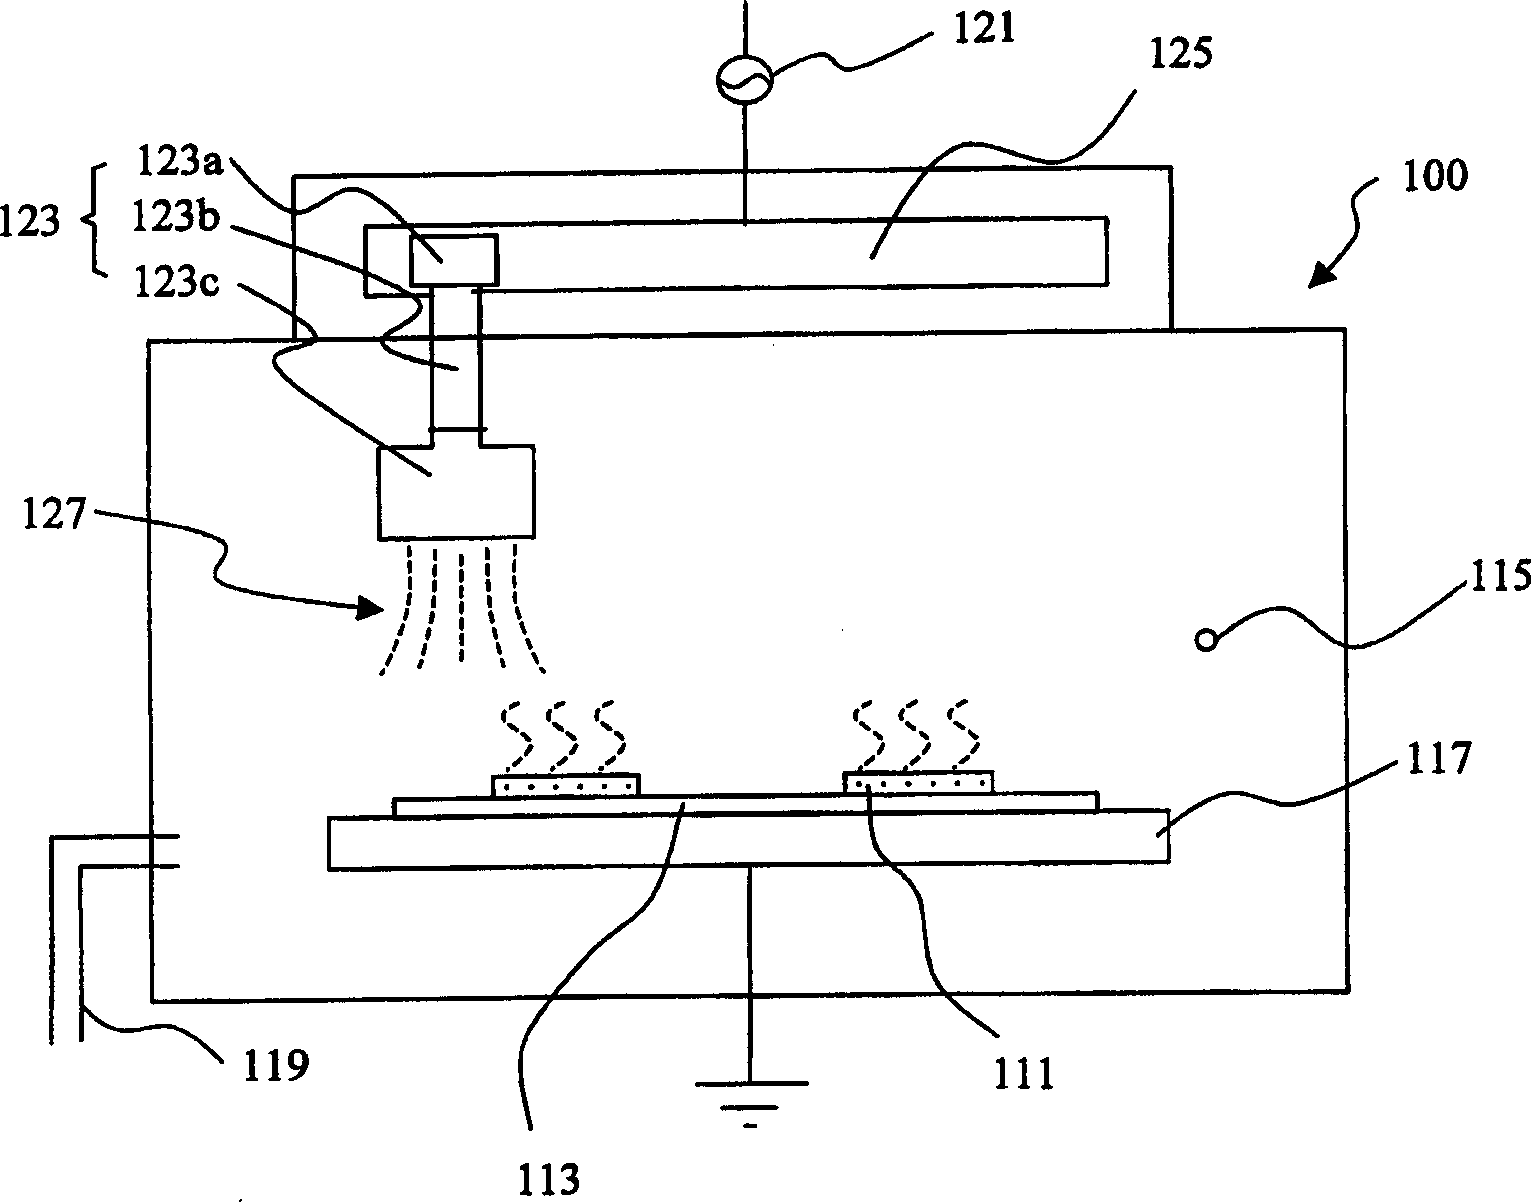 Electronic cyclotron resonance dusting device for treatment of glass chip or chip